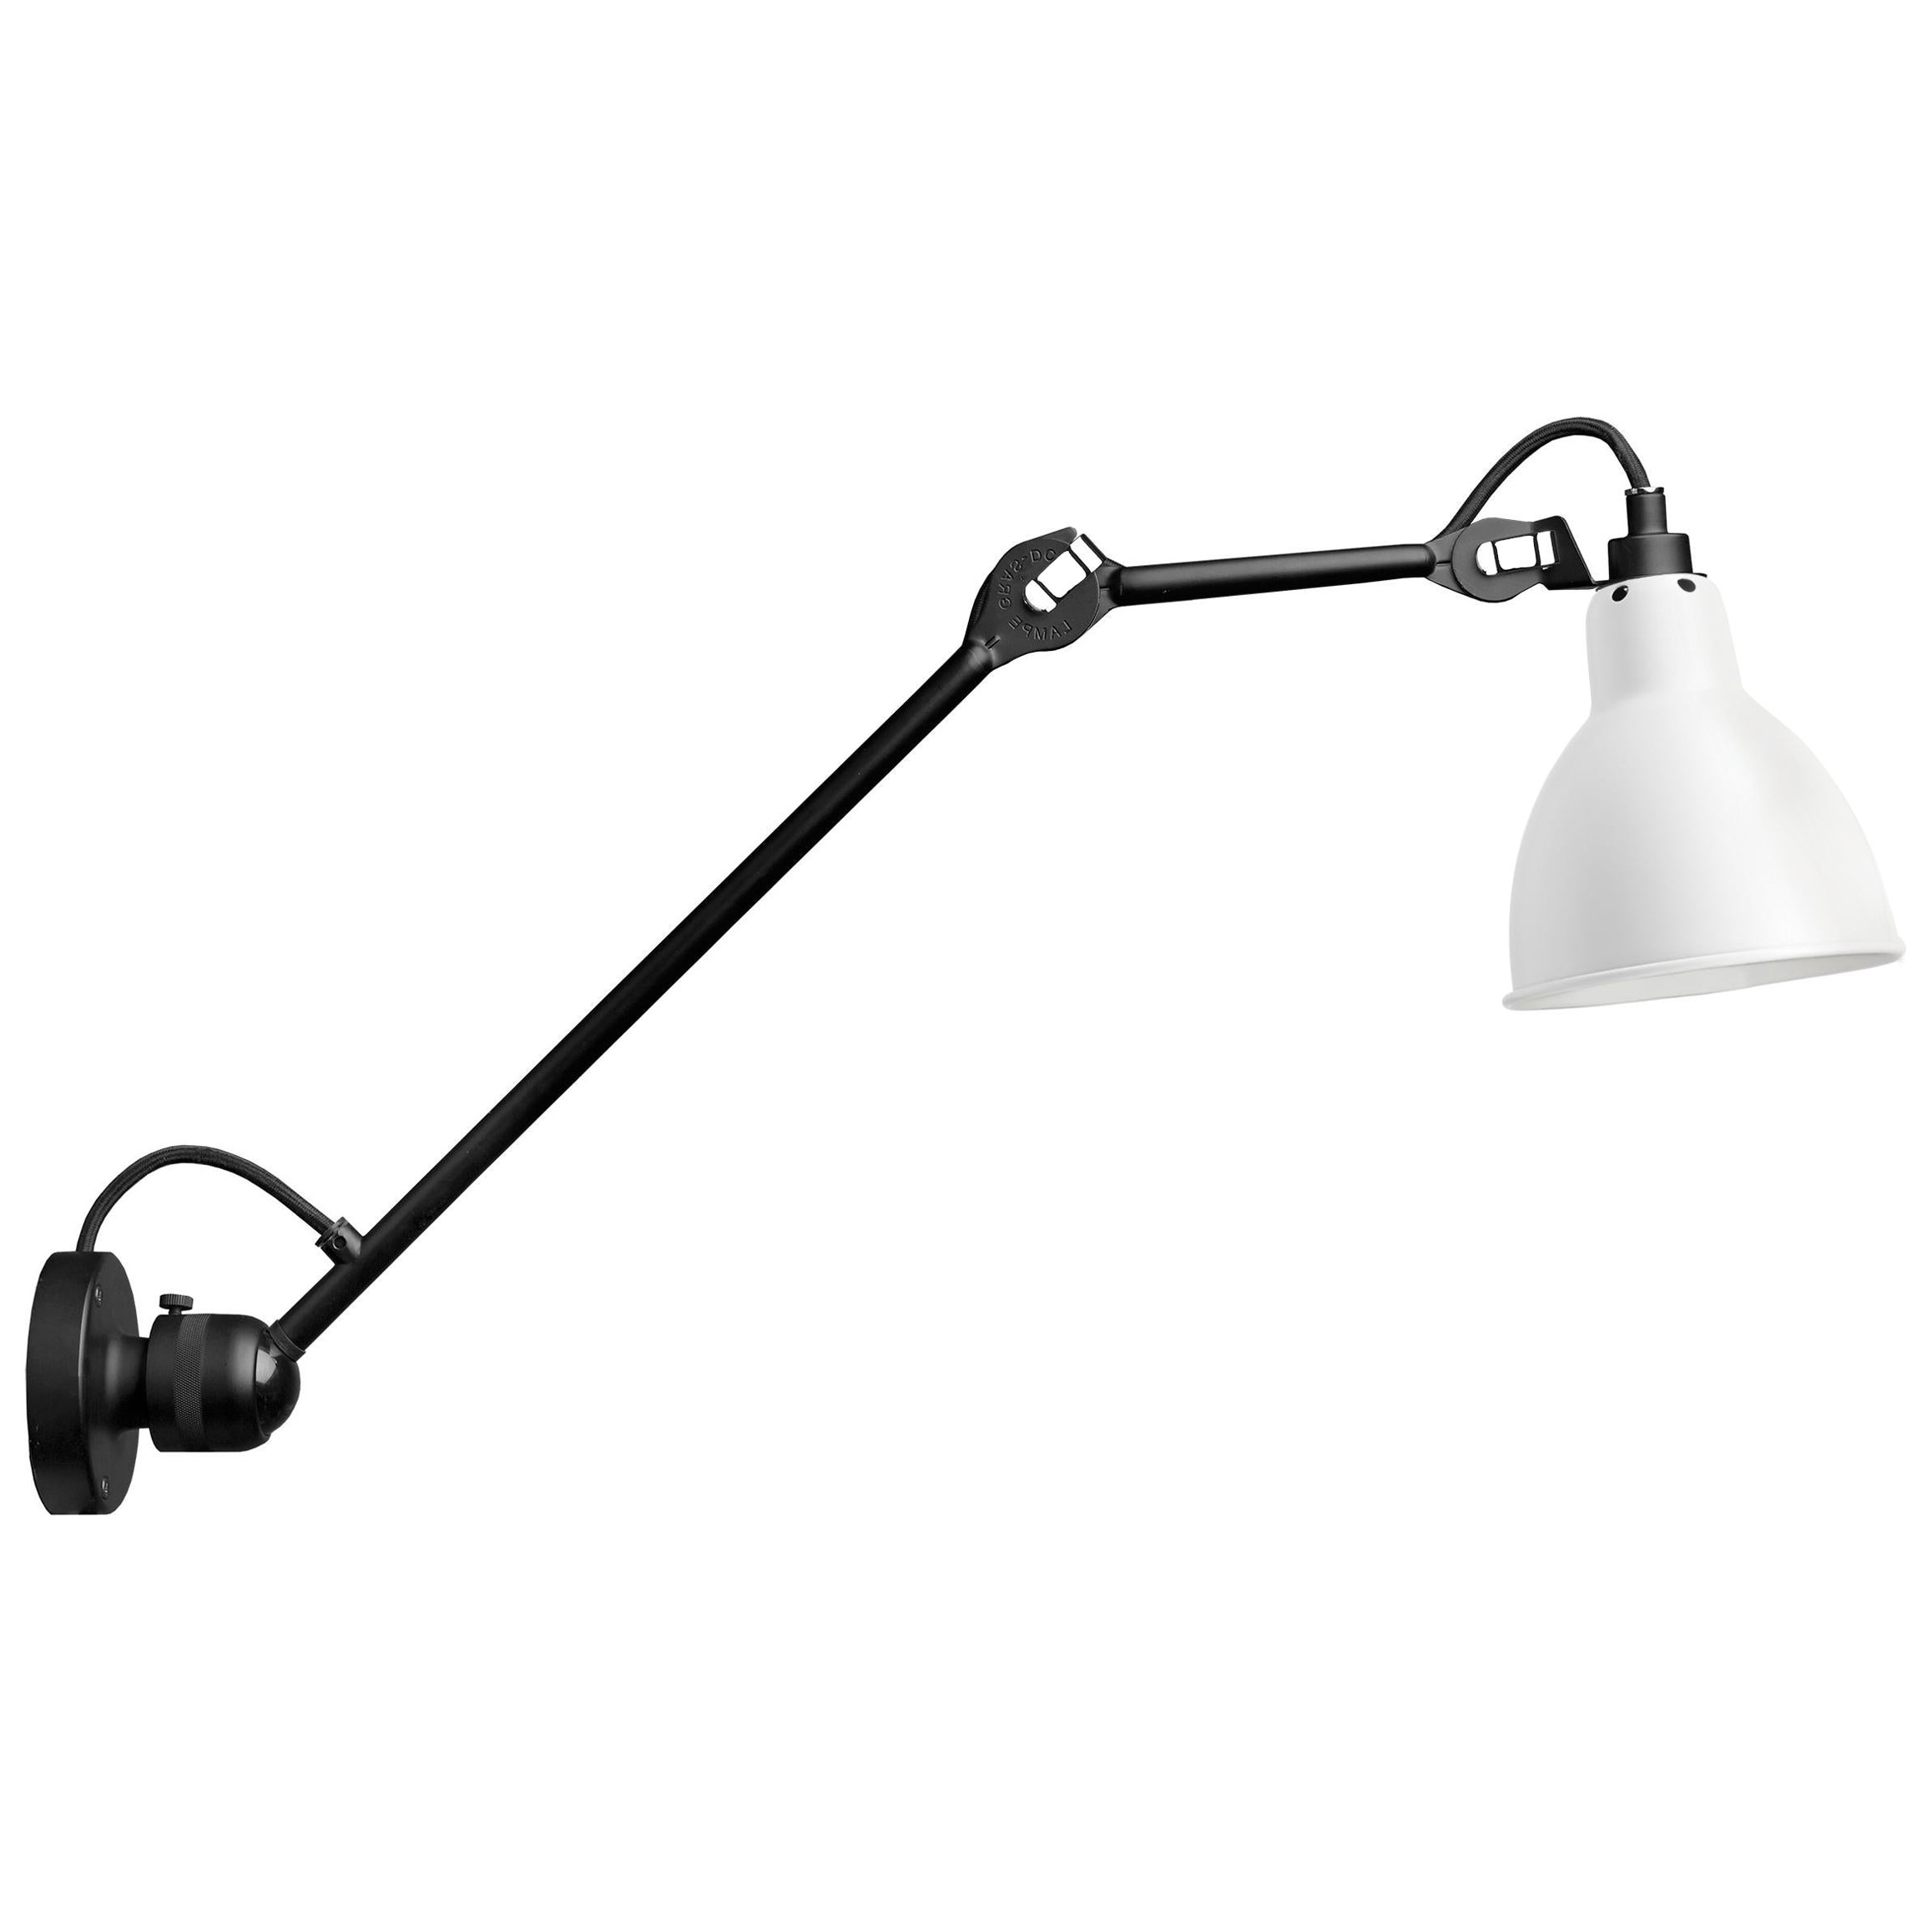 DCW Editions La Lampe Gras N°304 L40 Wall Lamp in Black Arm and White Shade